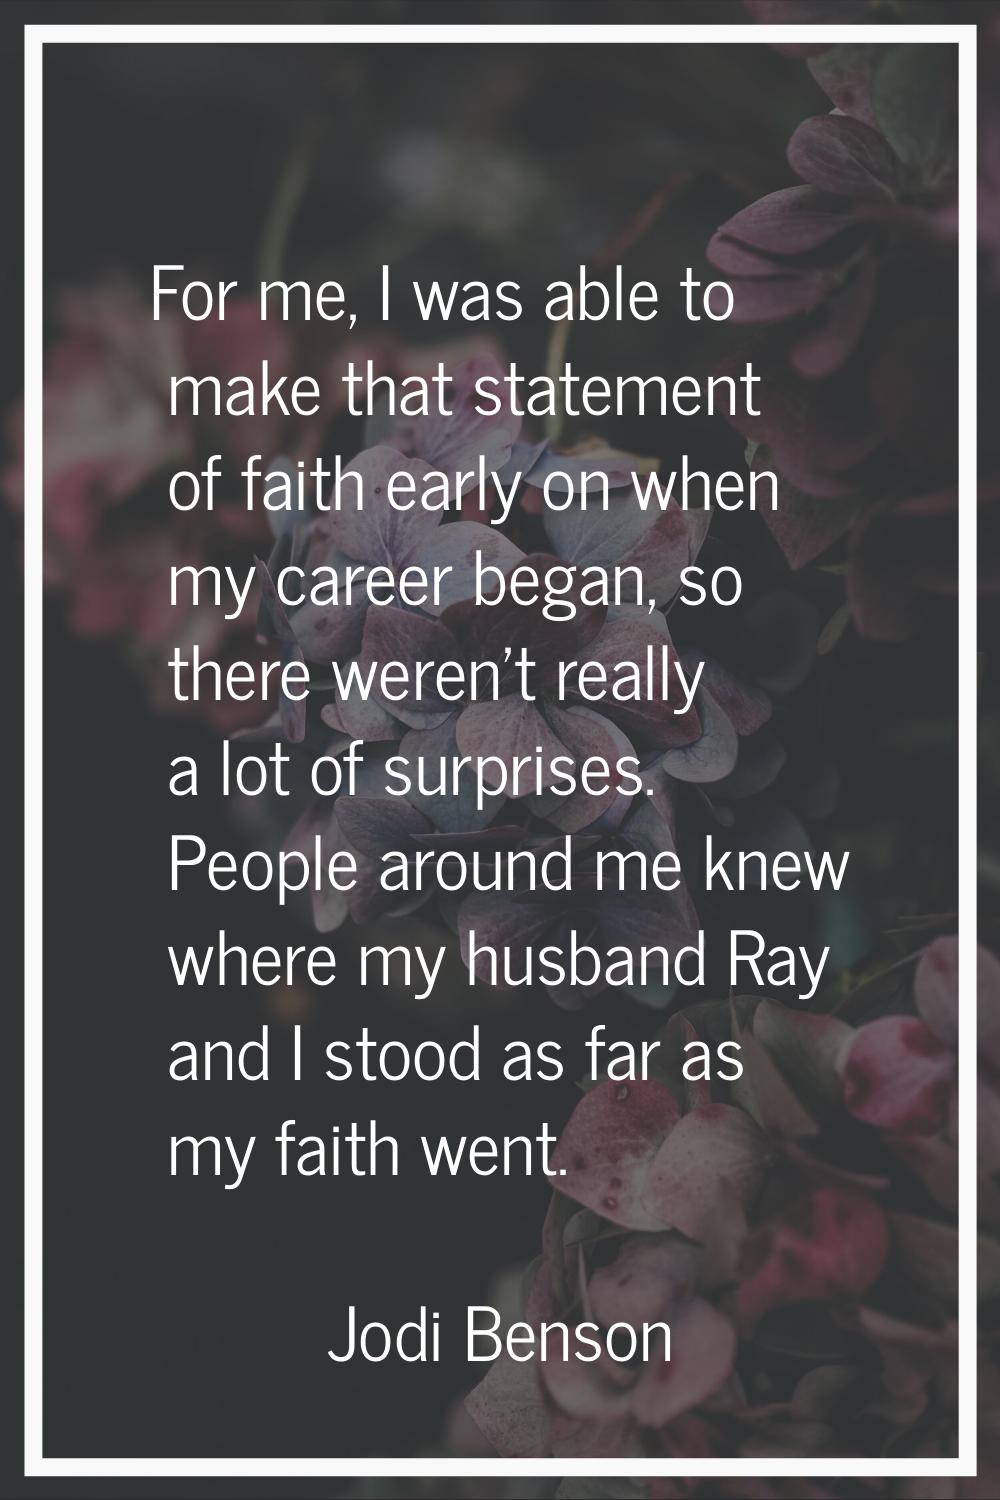 For me, I was able to make that statement of faith early on when my career began, so there weren't 